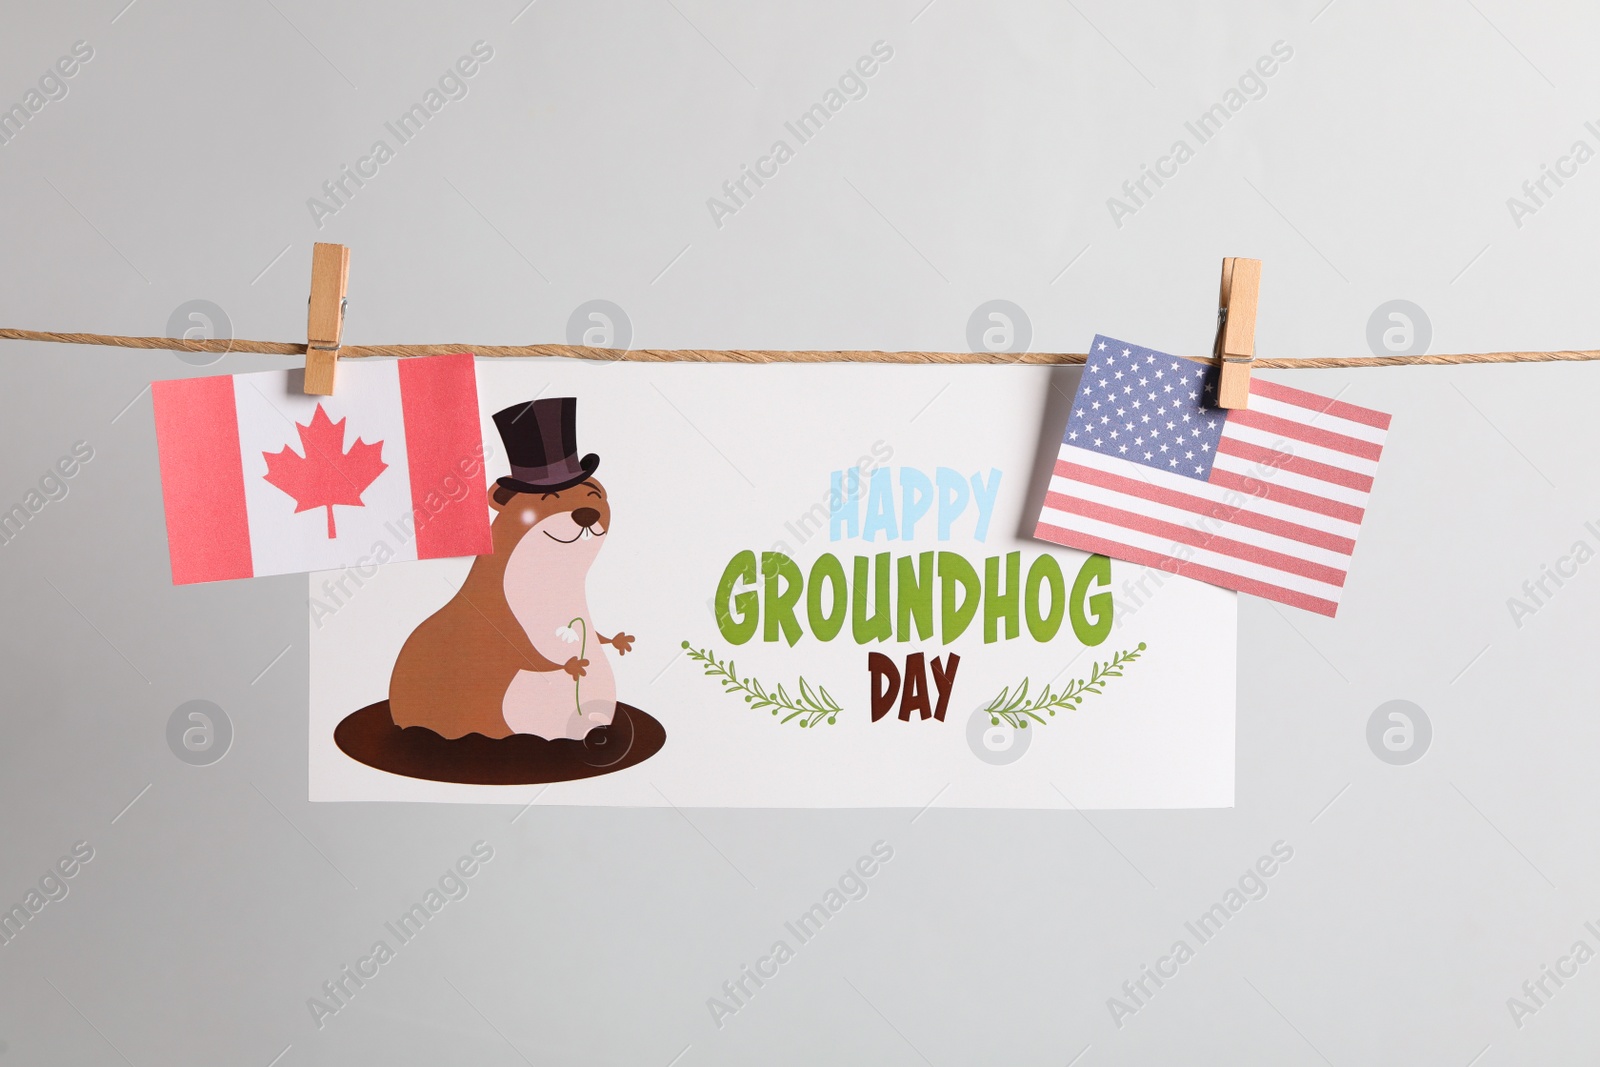 Photo of Happy Groundhog Day greeting card and flags hanging on light background